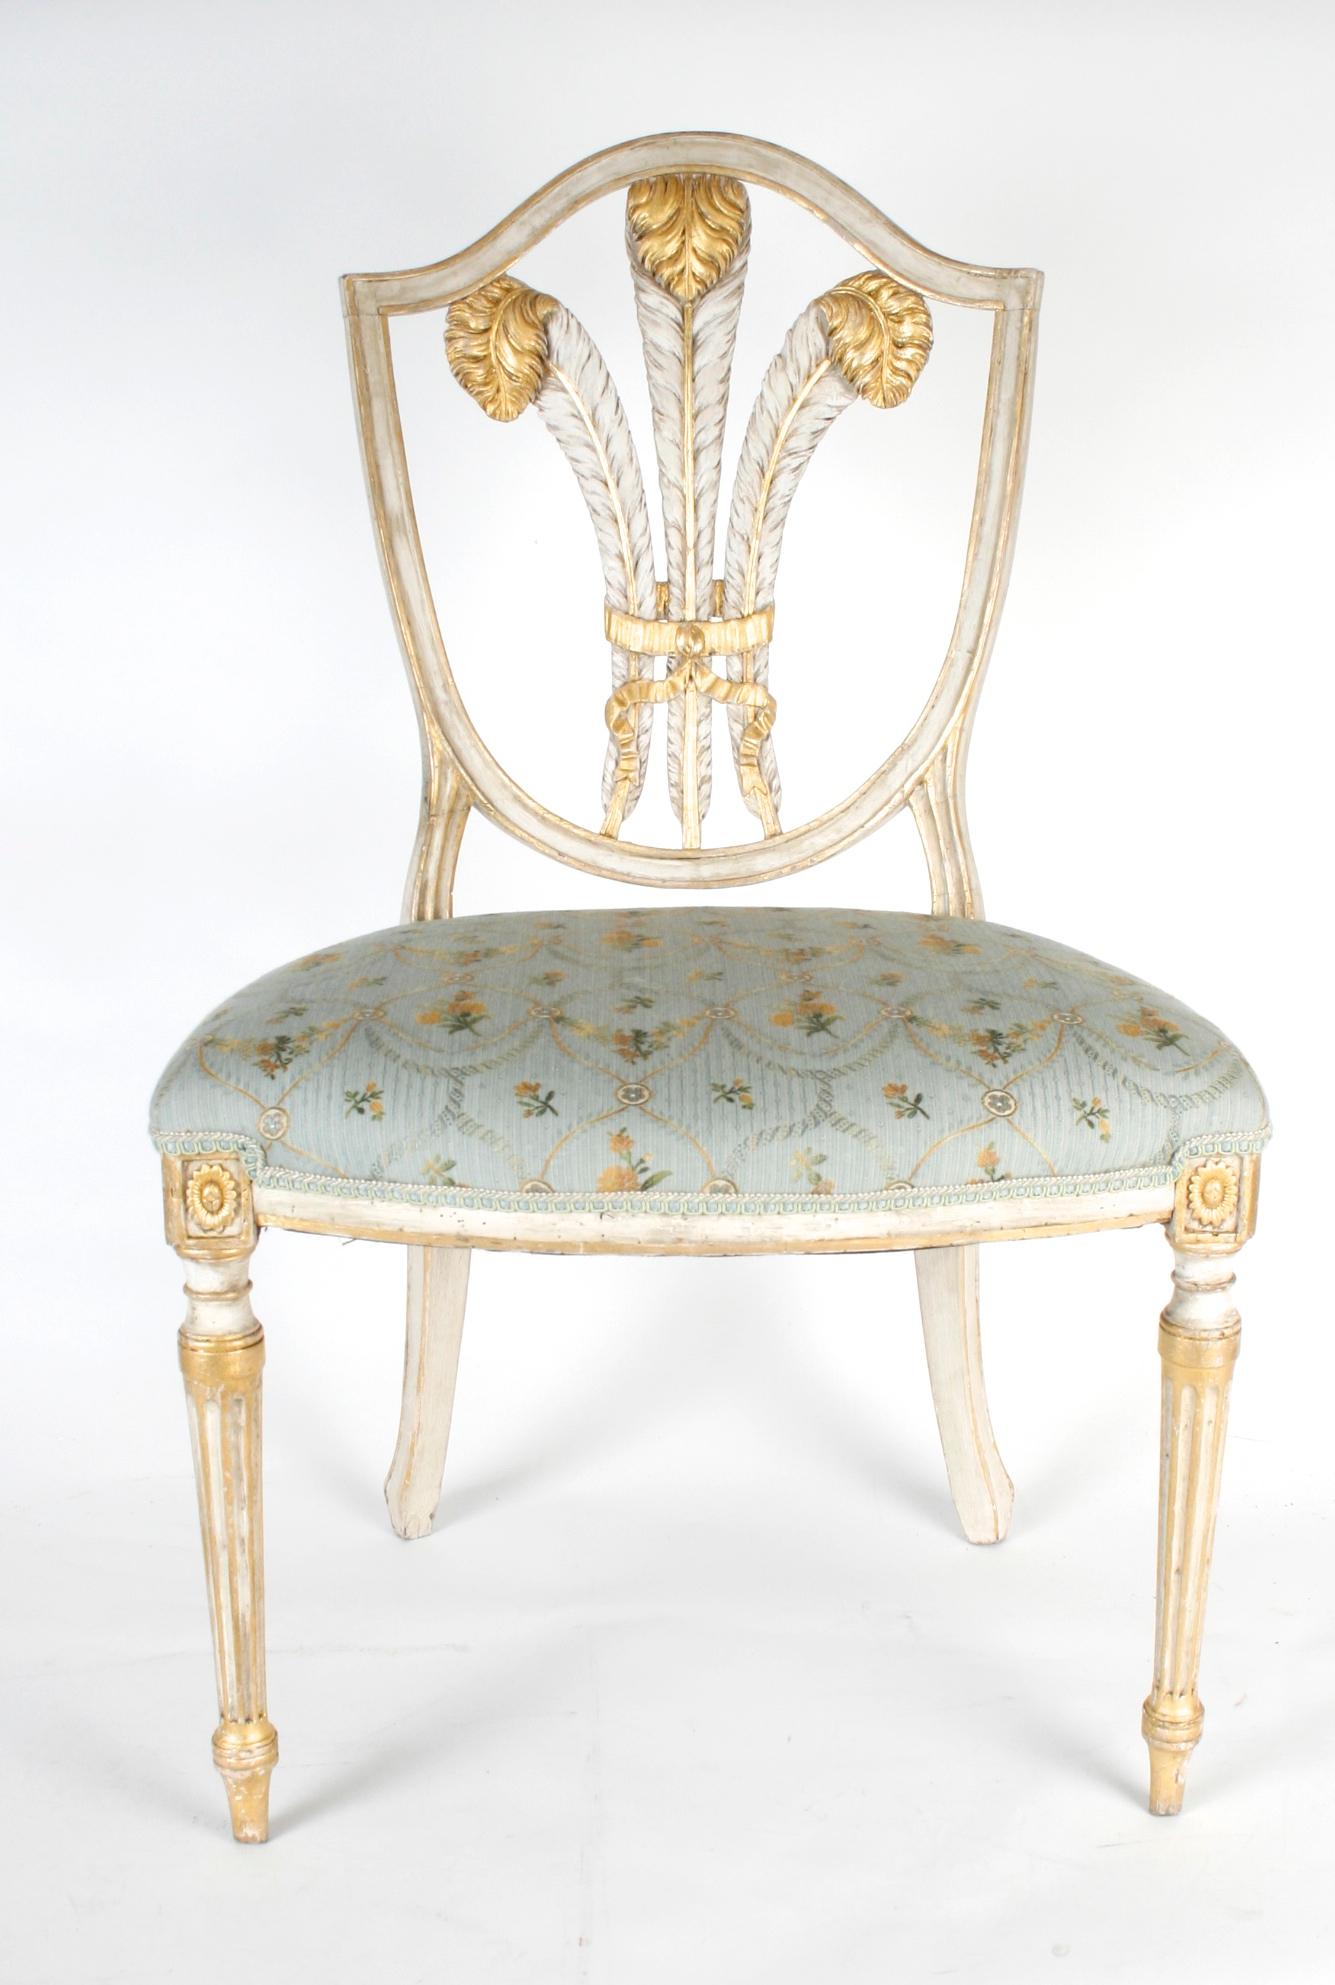 English George III Parcel Gilt Shield Back Side Chairs with Plumes, circa 1775